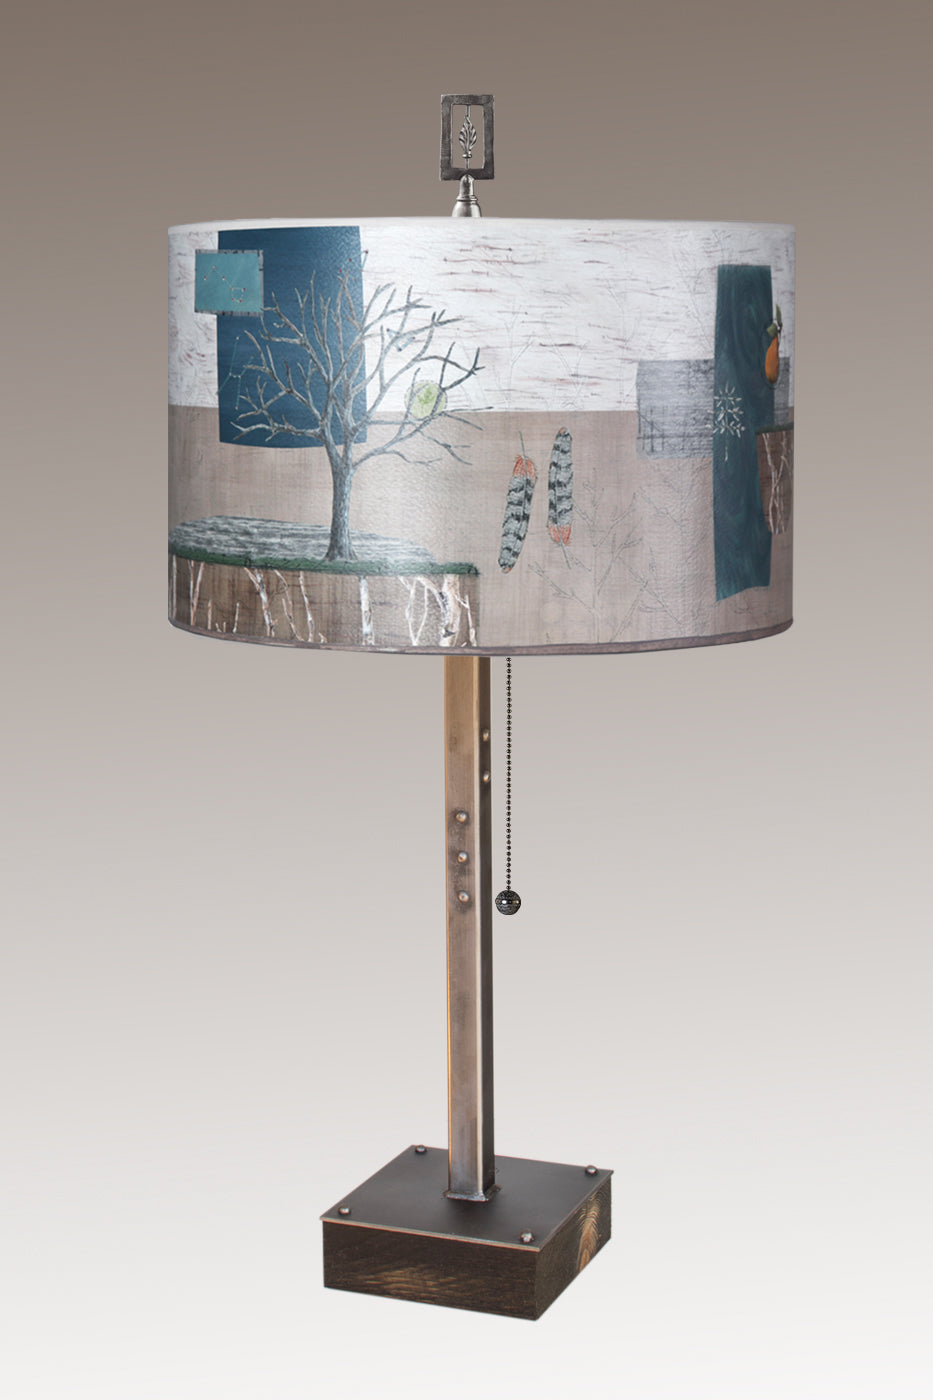 Steel Table Lamp on Wood with Large Drum Shade in Wander in Drift